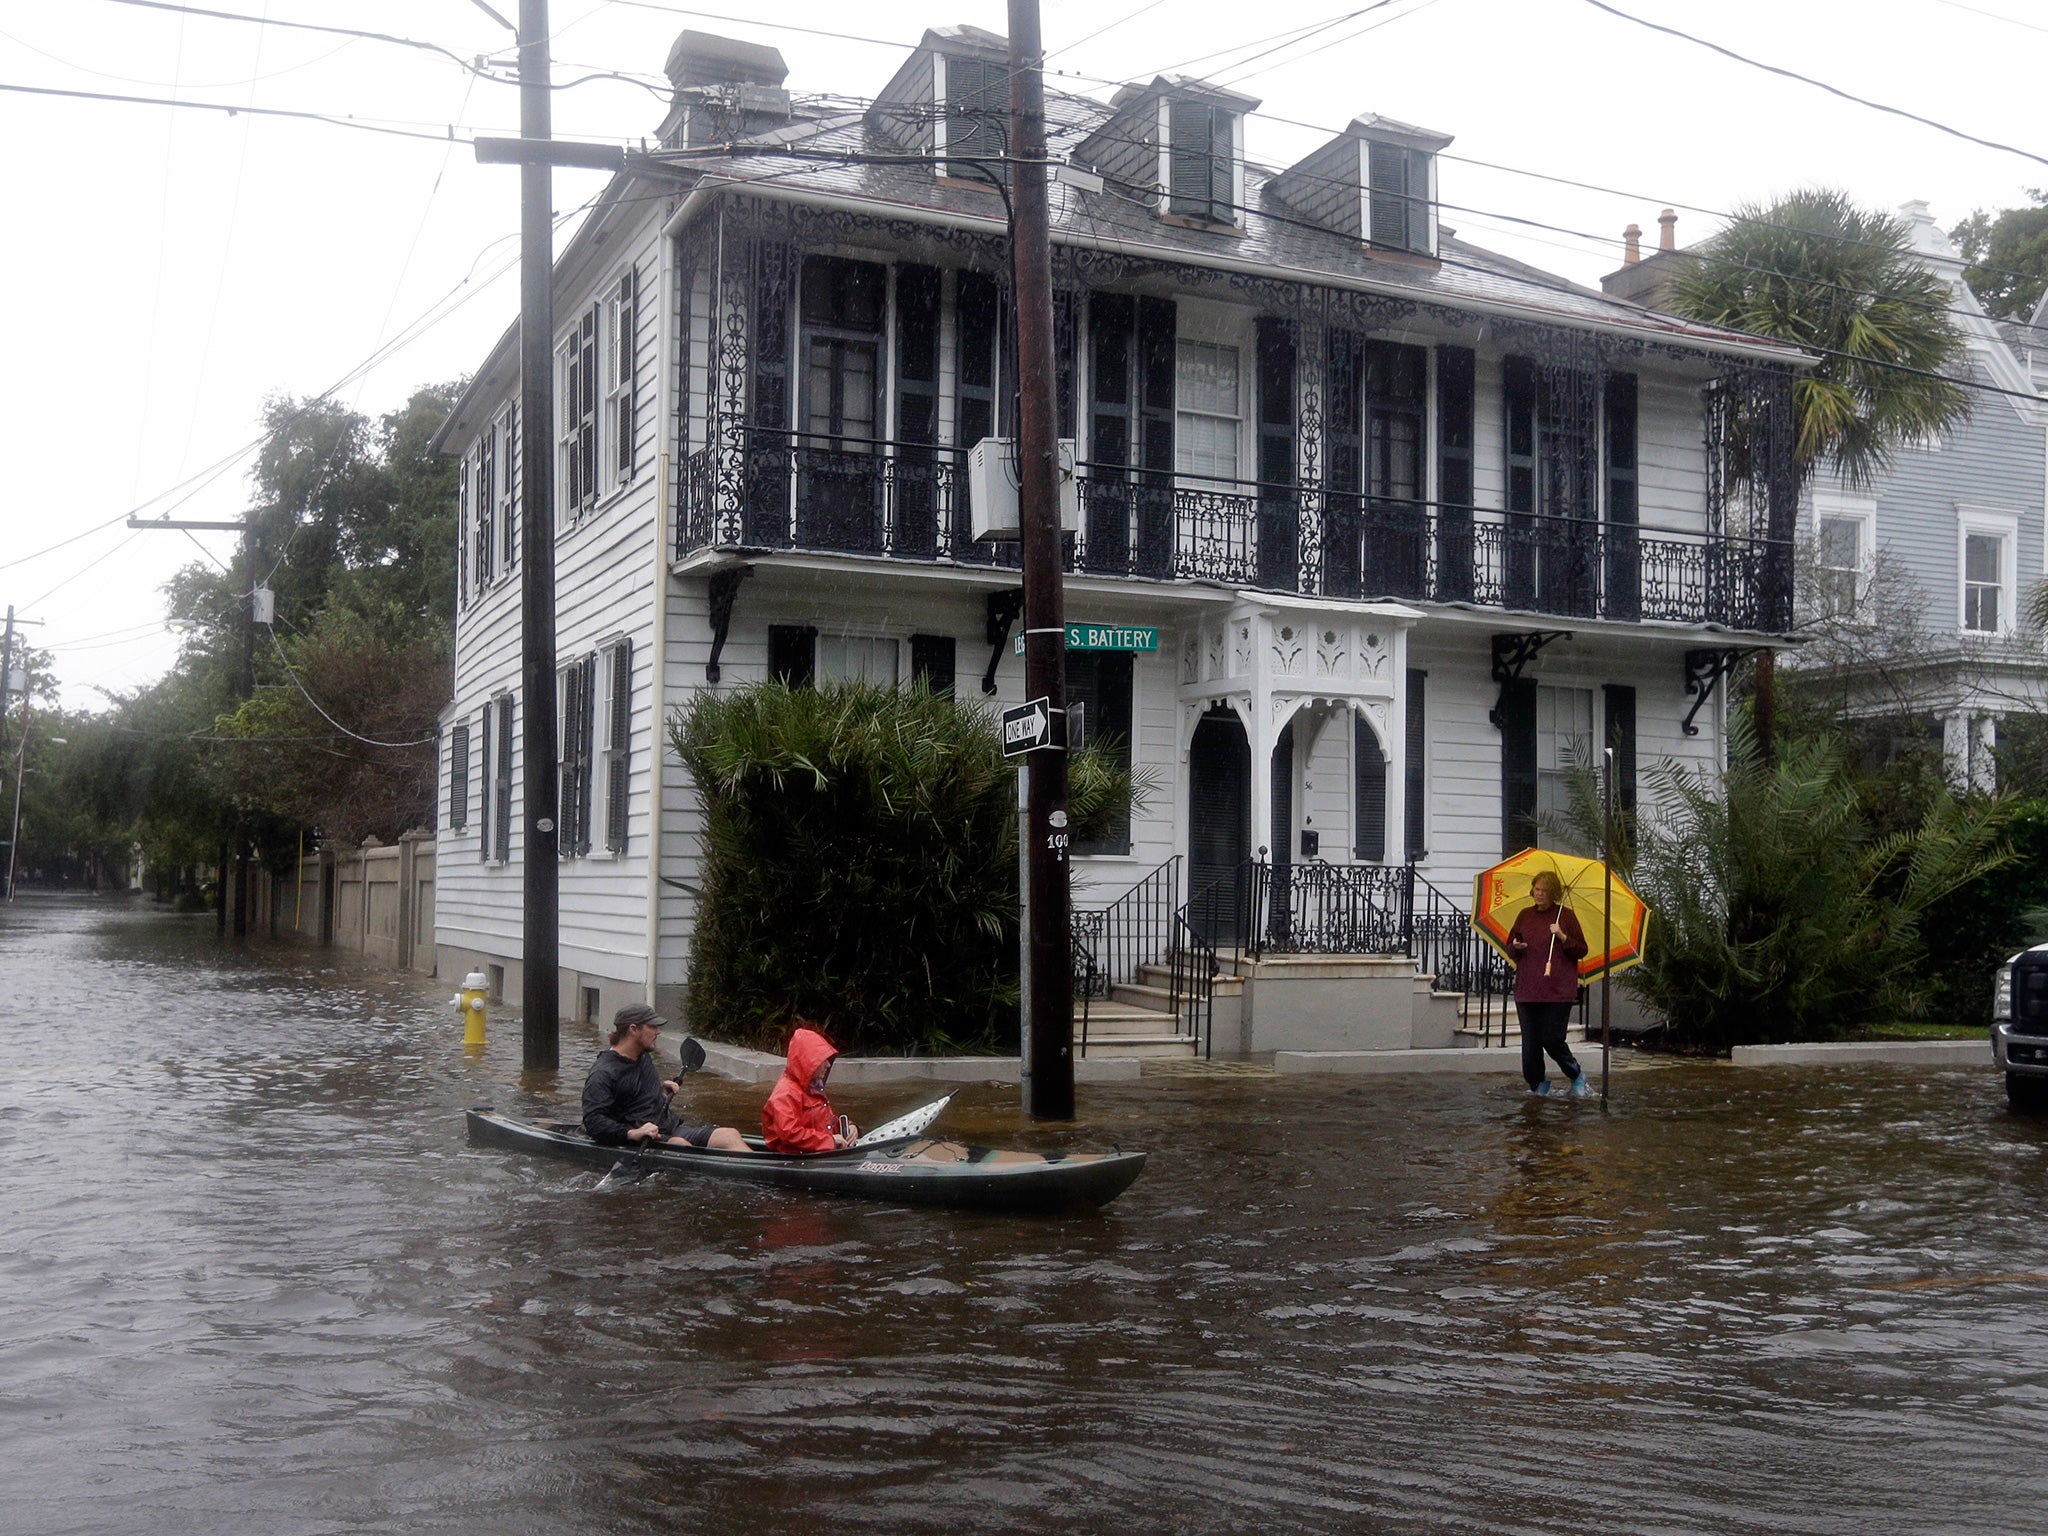 Paul Banker, left, paddles a kayak and his wife Wink Banker, as they takes photos on a flooded street in Charleston, South Carolina